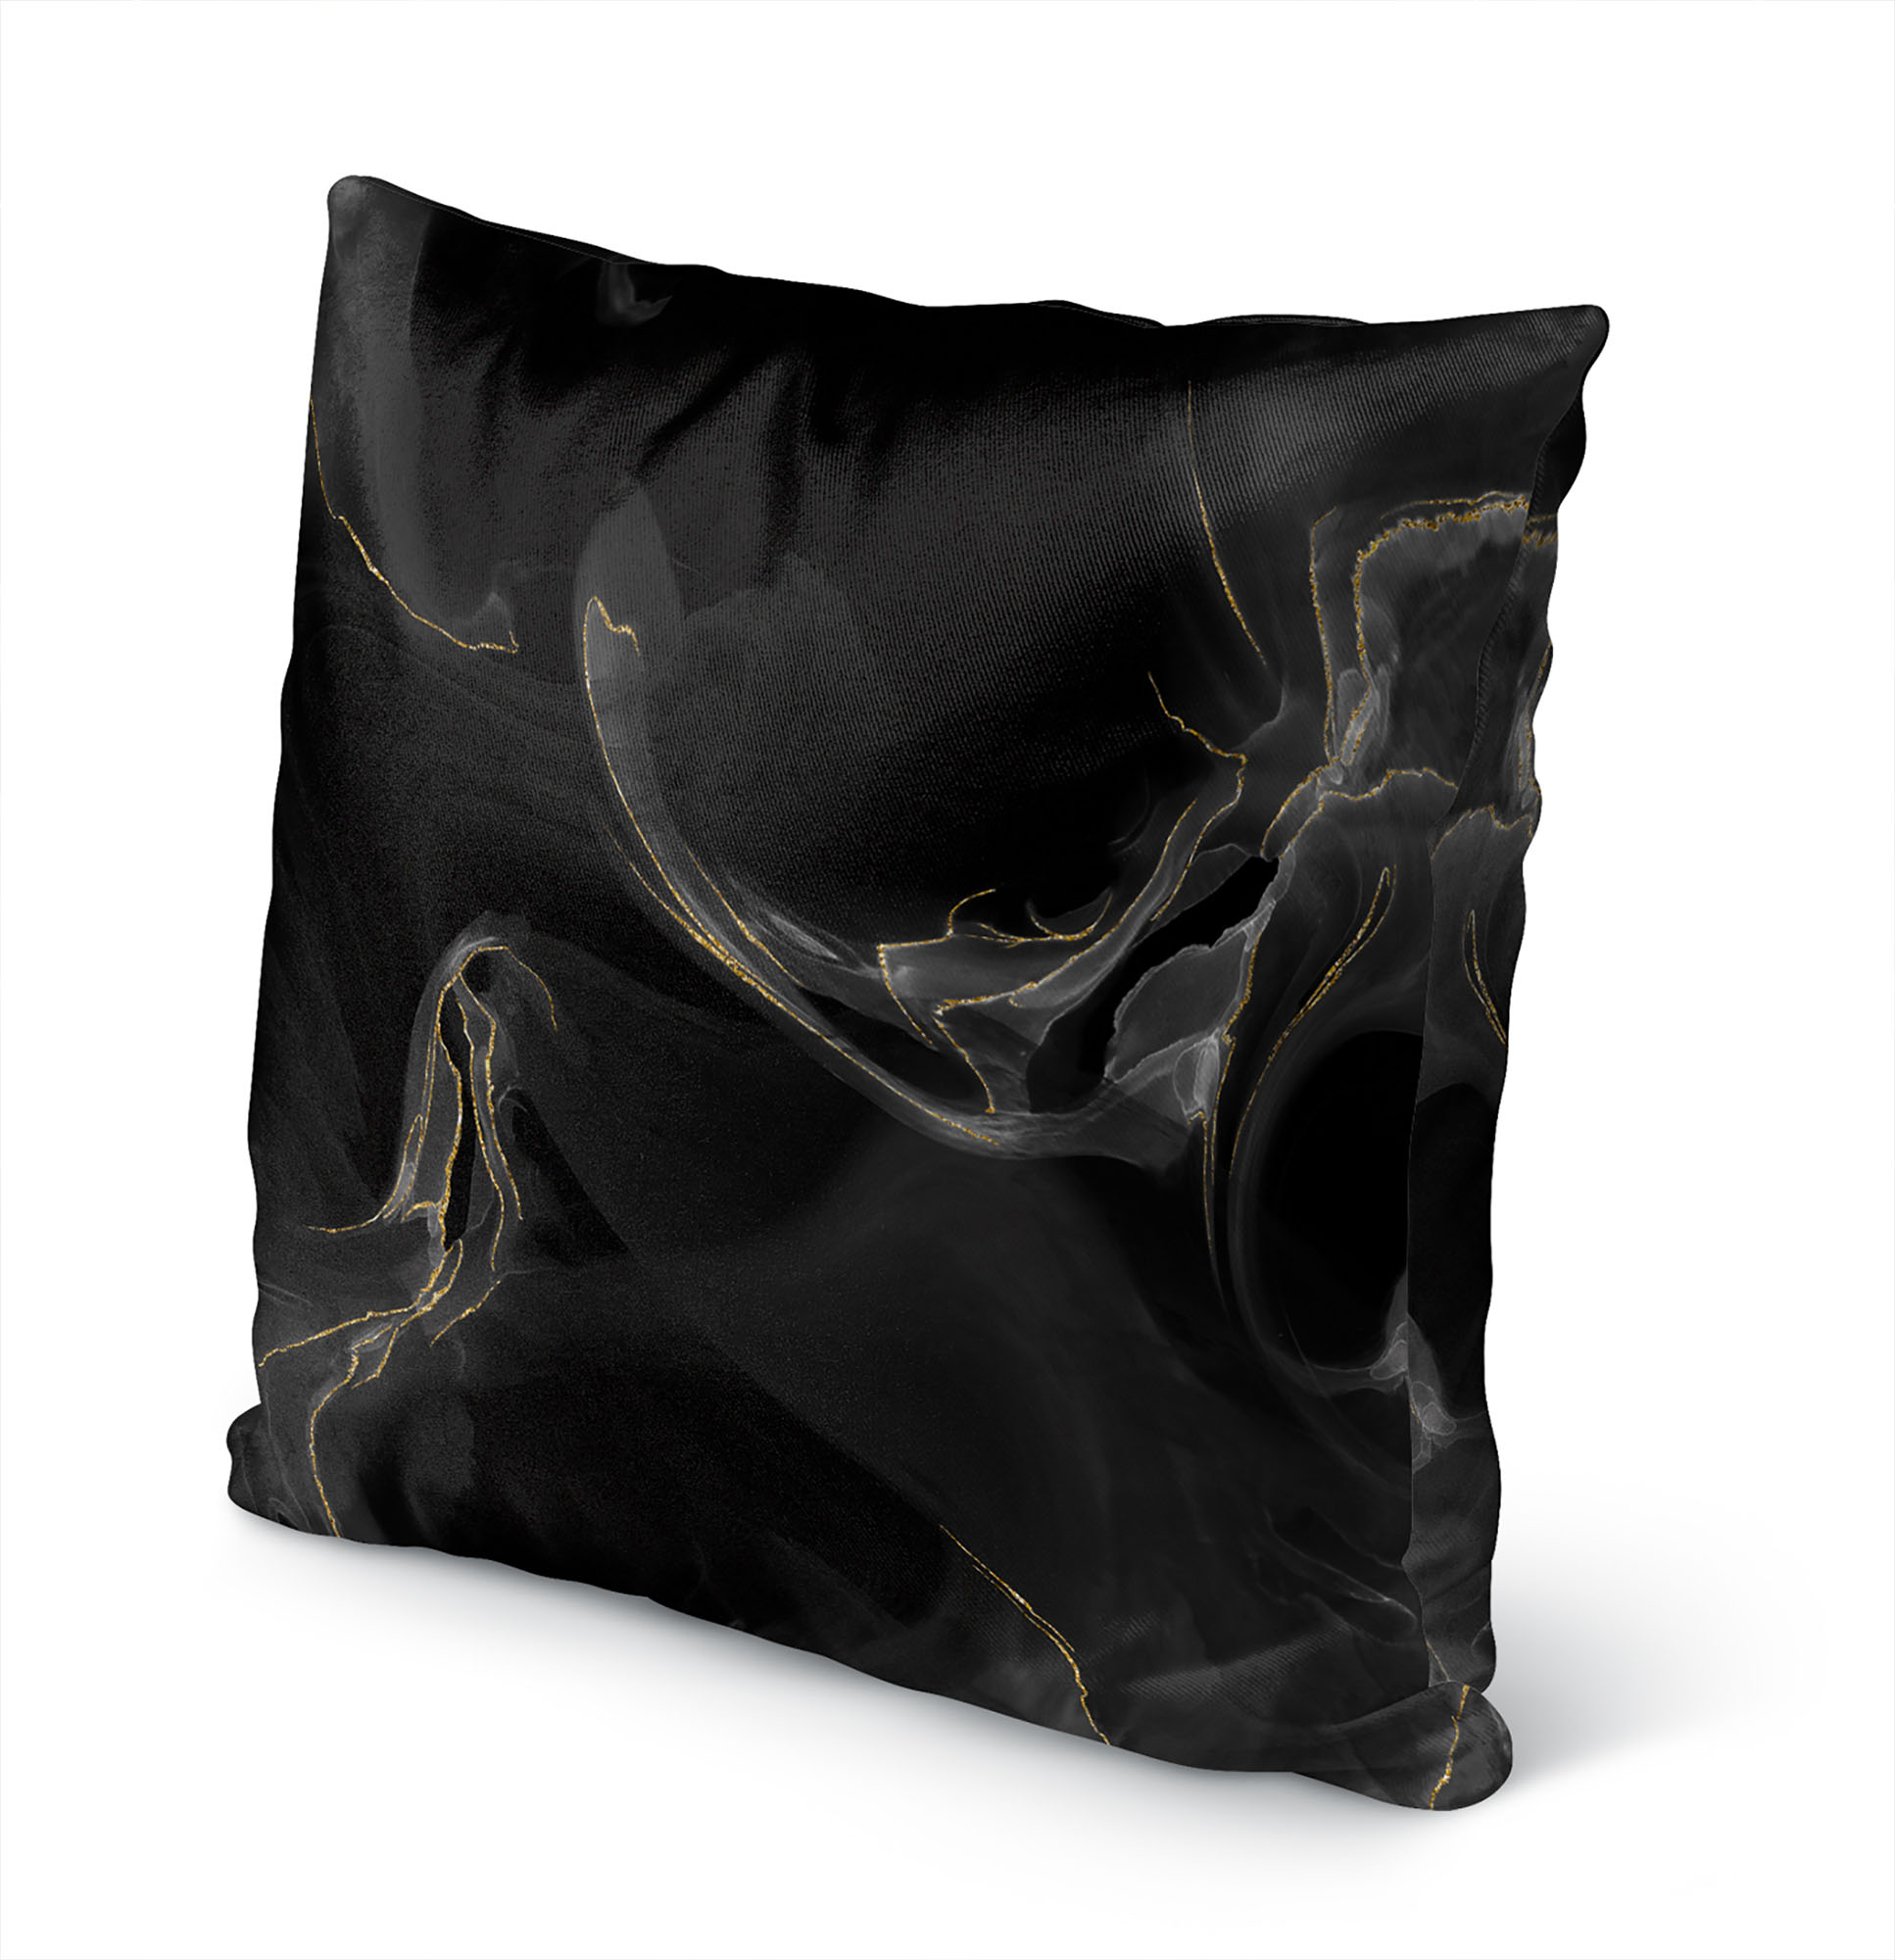 Marble Black Outdoor Pillow by Kavka Designs - image 3 of 5